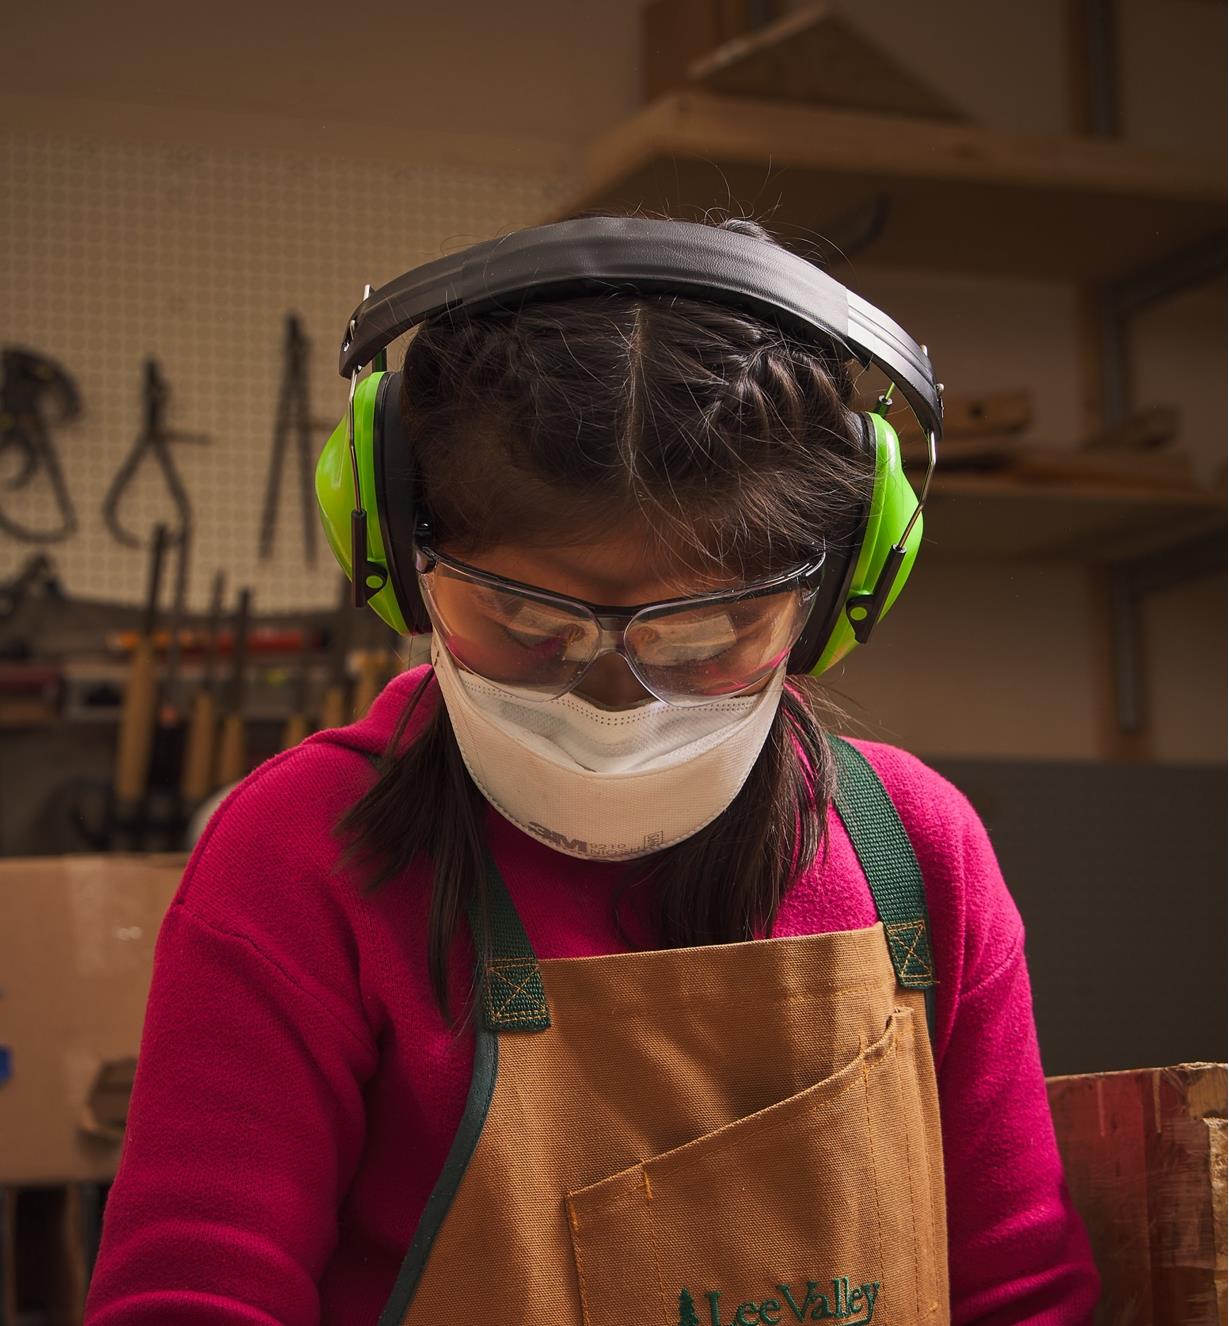 A child in a workshop wearing hearing protectors, safety glasses, a dust mask and an apron